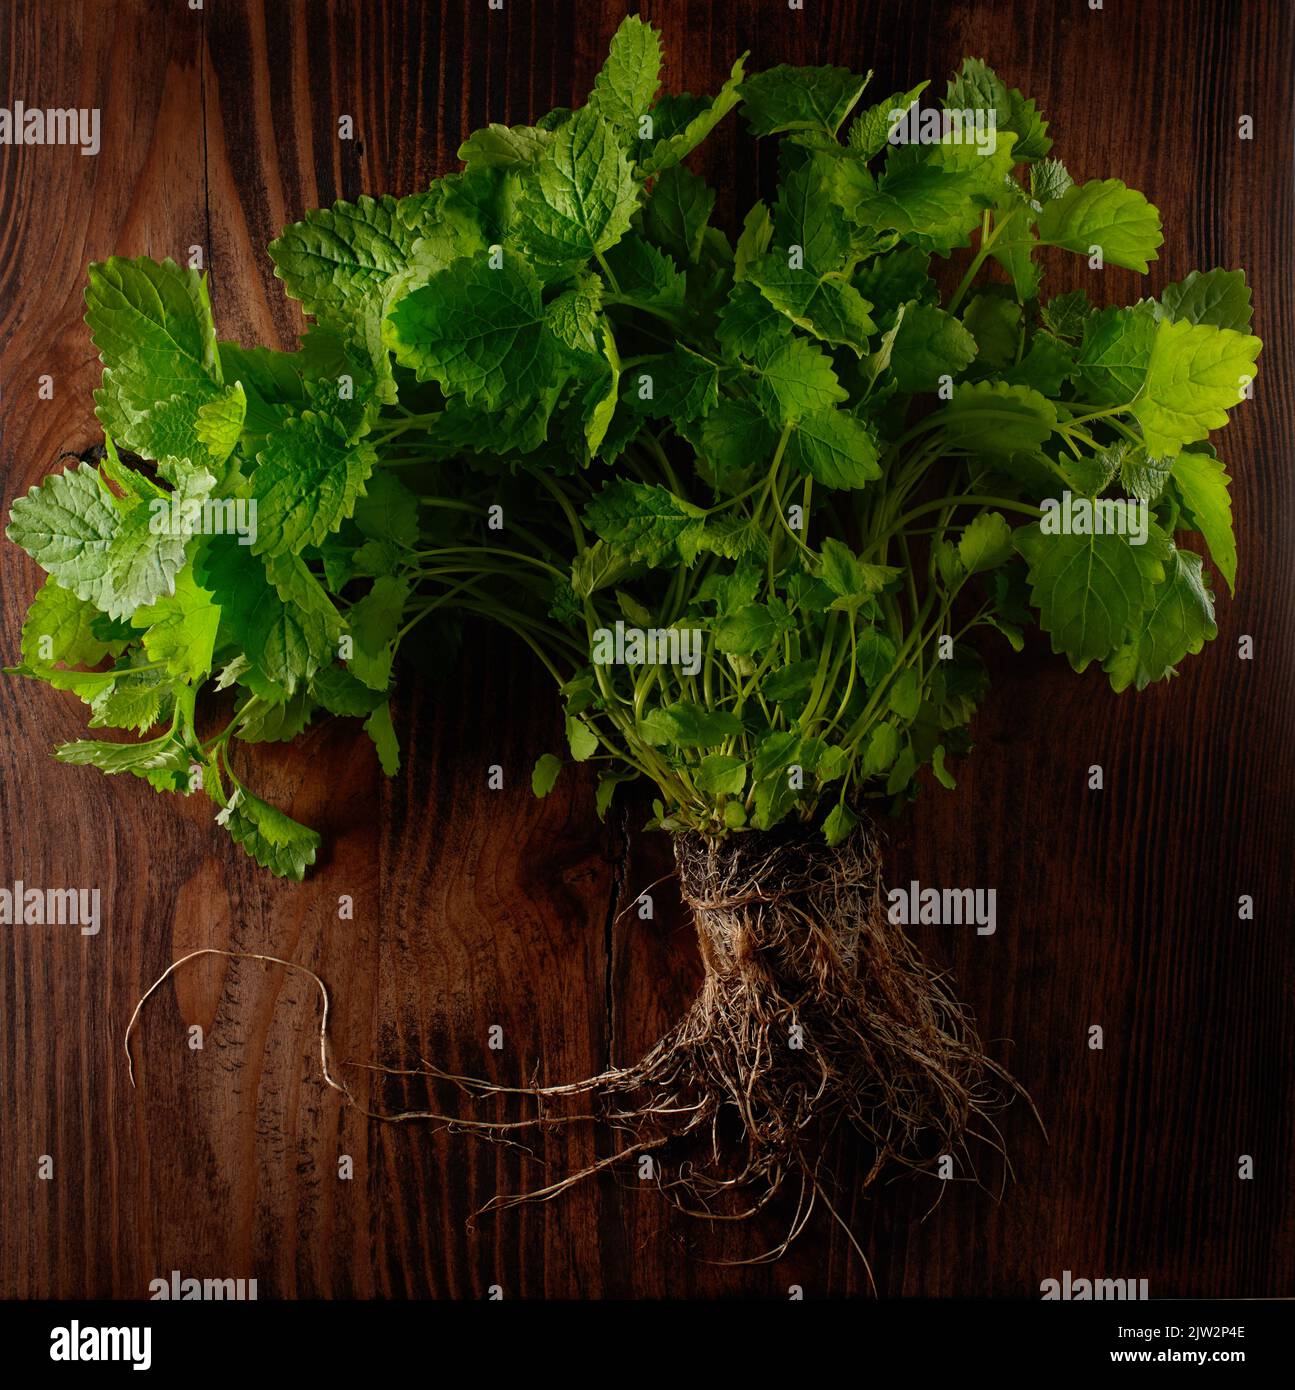 Bush of green lemon balm with roots in ground on dark wooden table background Stock Photo